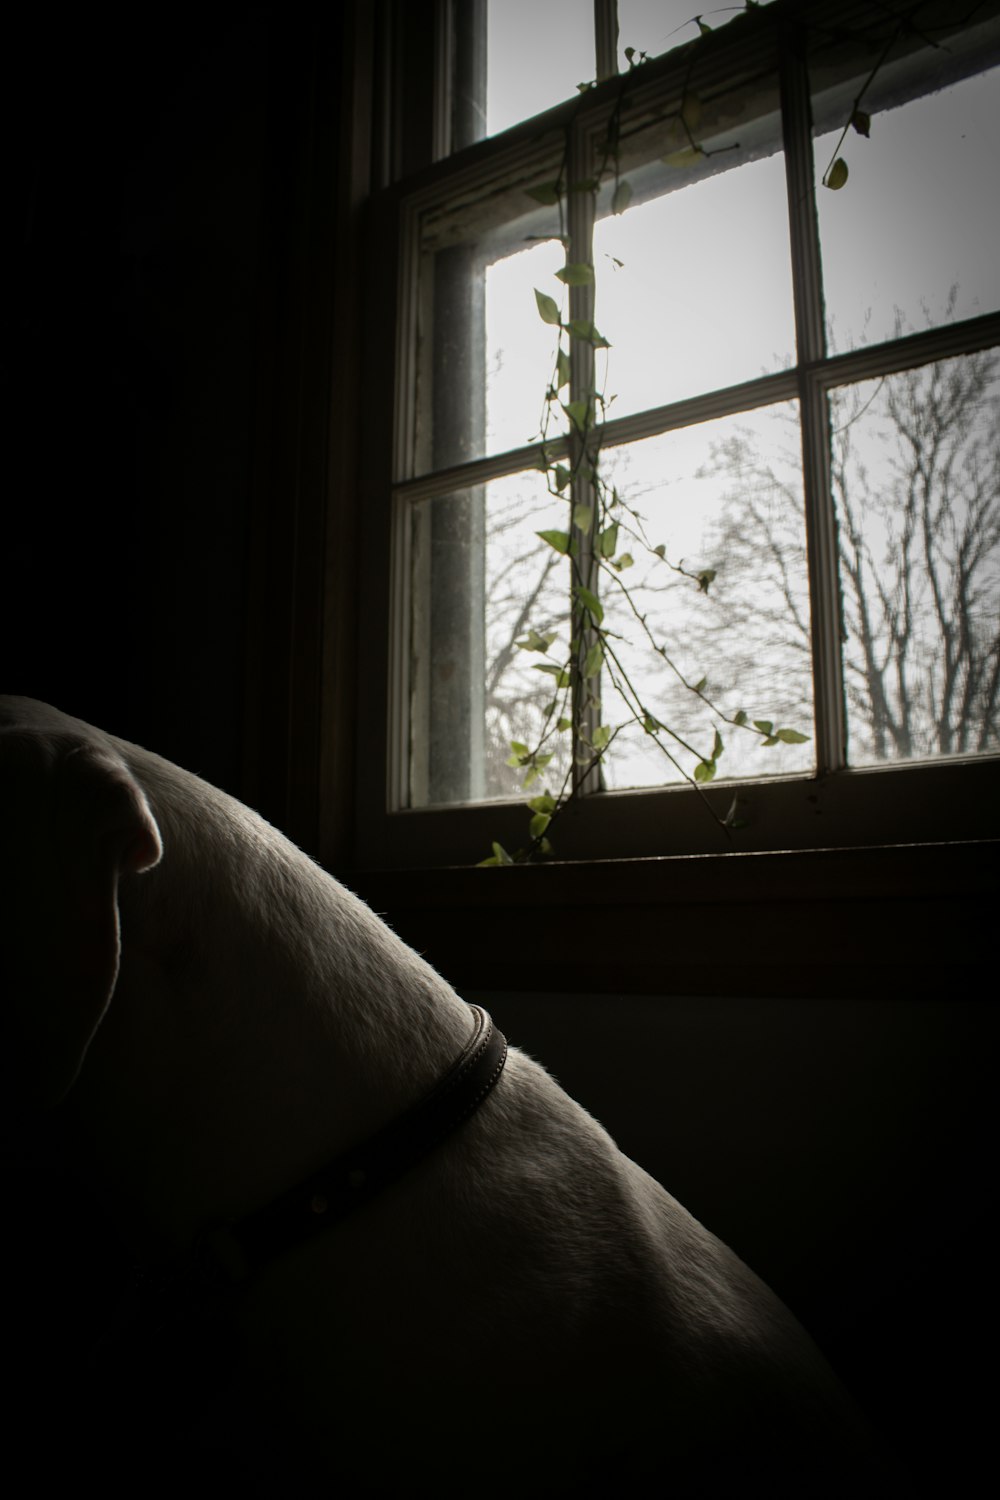 a dog is looking out of a window